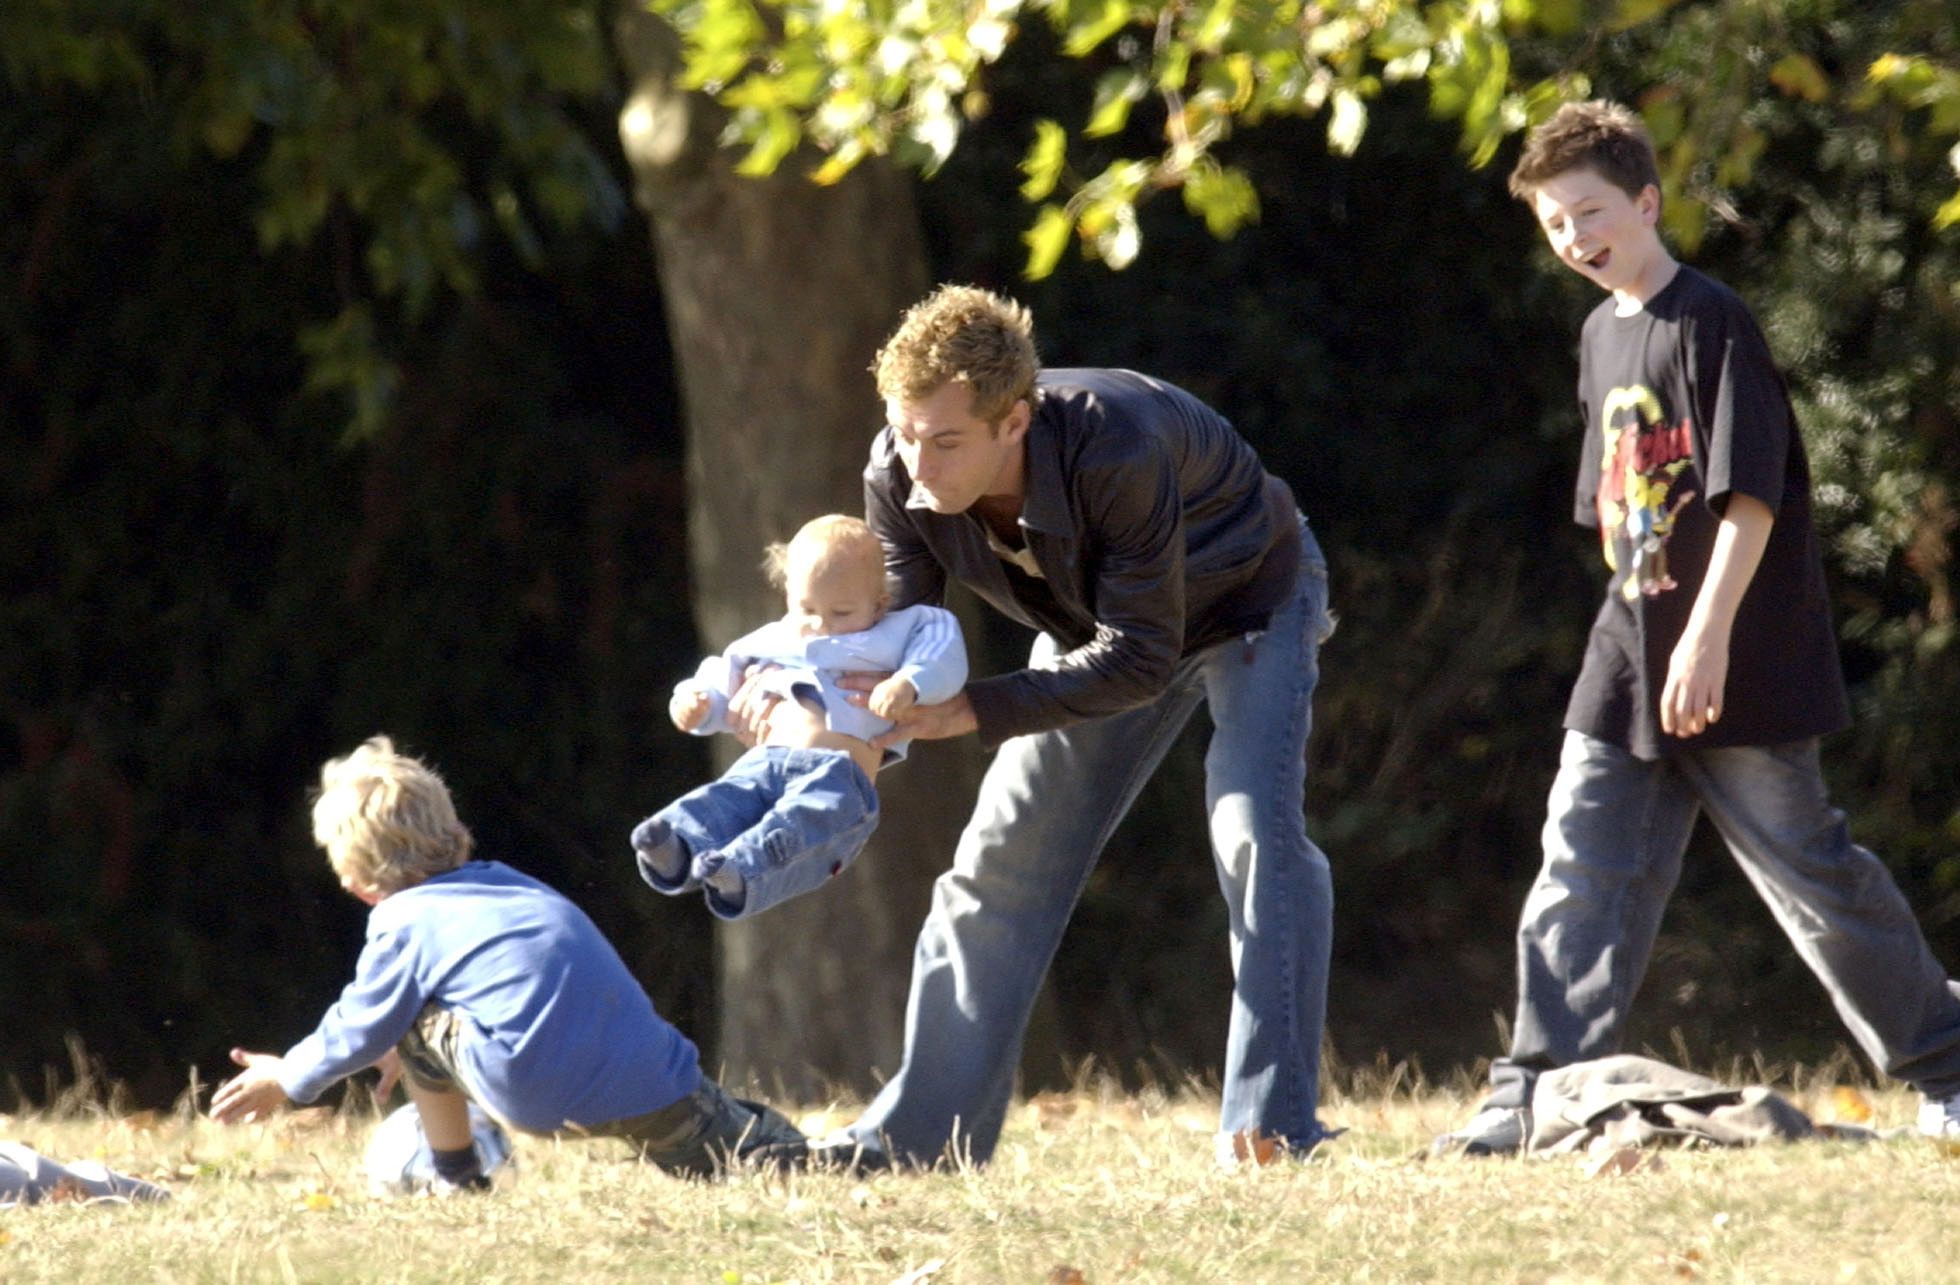 Jude Law And Children In A London Park on October 06, 2003 | Photo: Getty Images